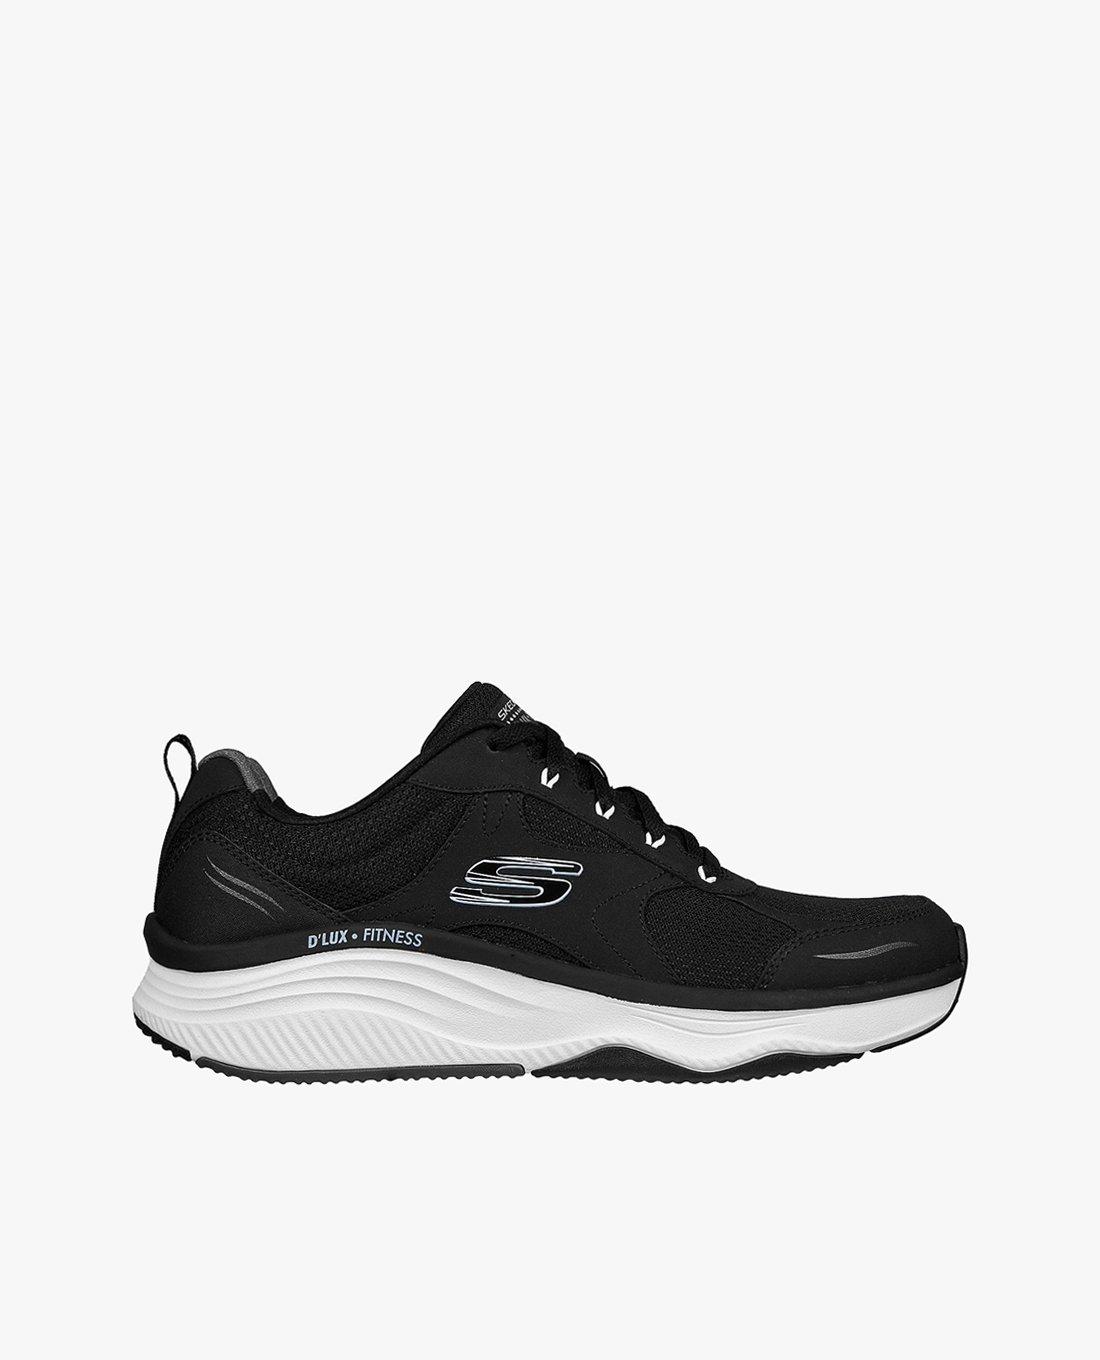 SKECHERS - Giày thể thao nam thắt dây DLux Fitness 232359